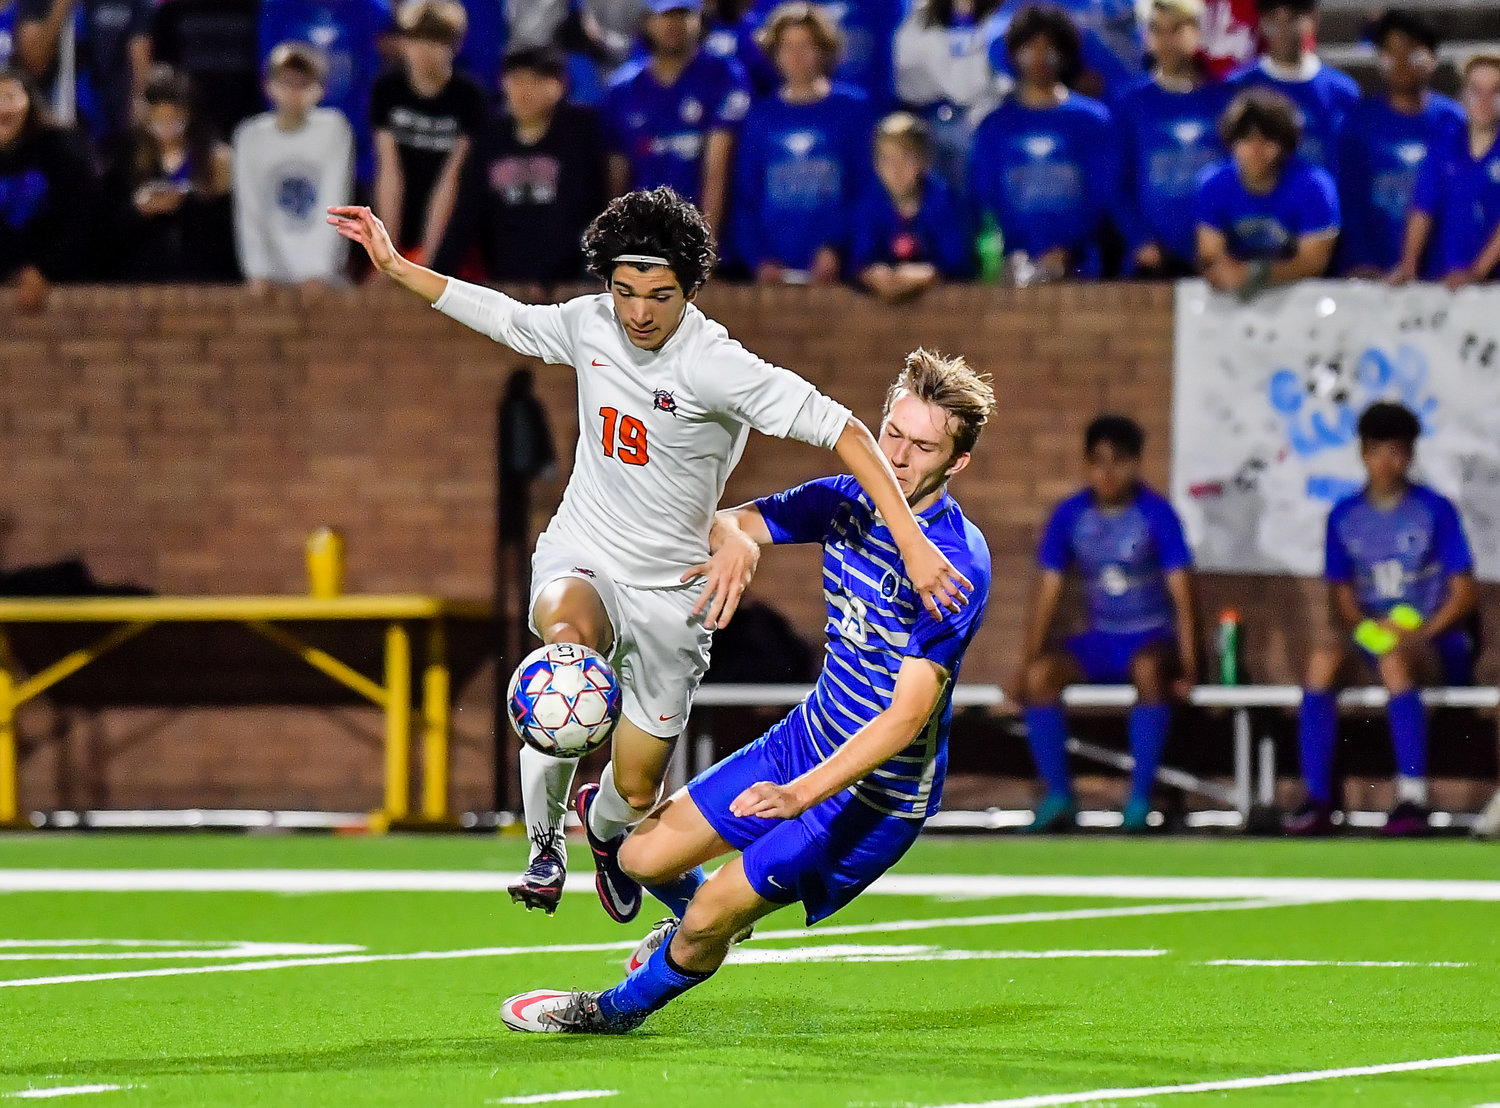 April 1, 2022: Seven Lakes Diego Flamenco #19 and Katy Taylors Lukas Piotrowicz #13 battle for the ball during Regional Quarterfinal soccer playoff, Seven Lakes vs Katy Taylor at Rhode Stadium. (Photo by Mark Goodman / Katy Times)